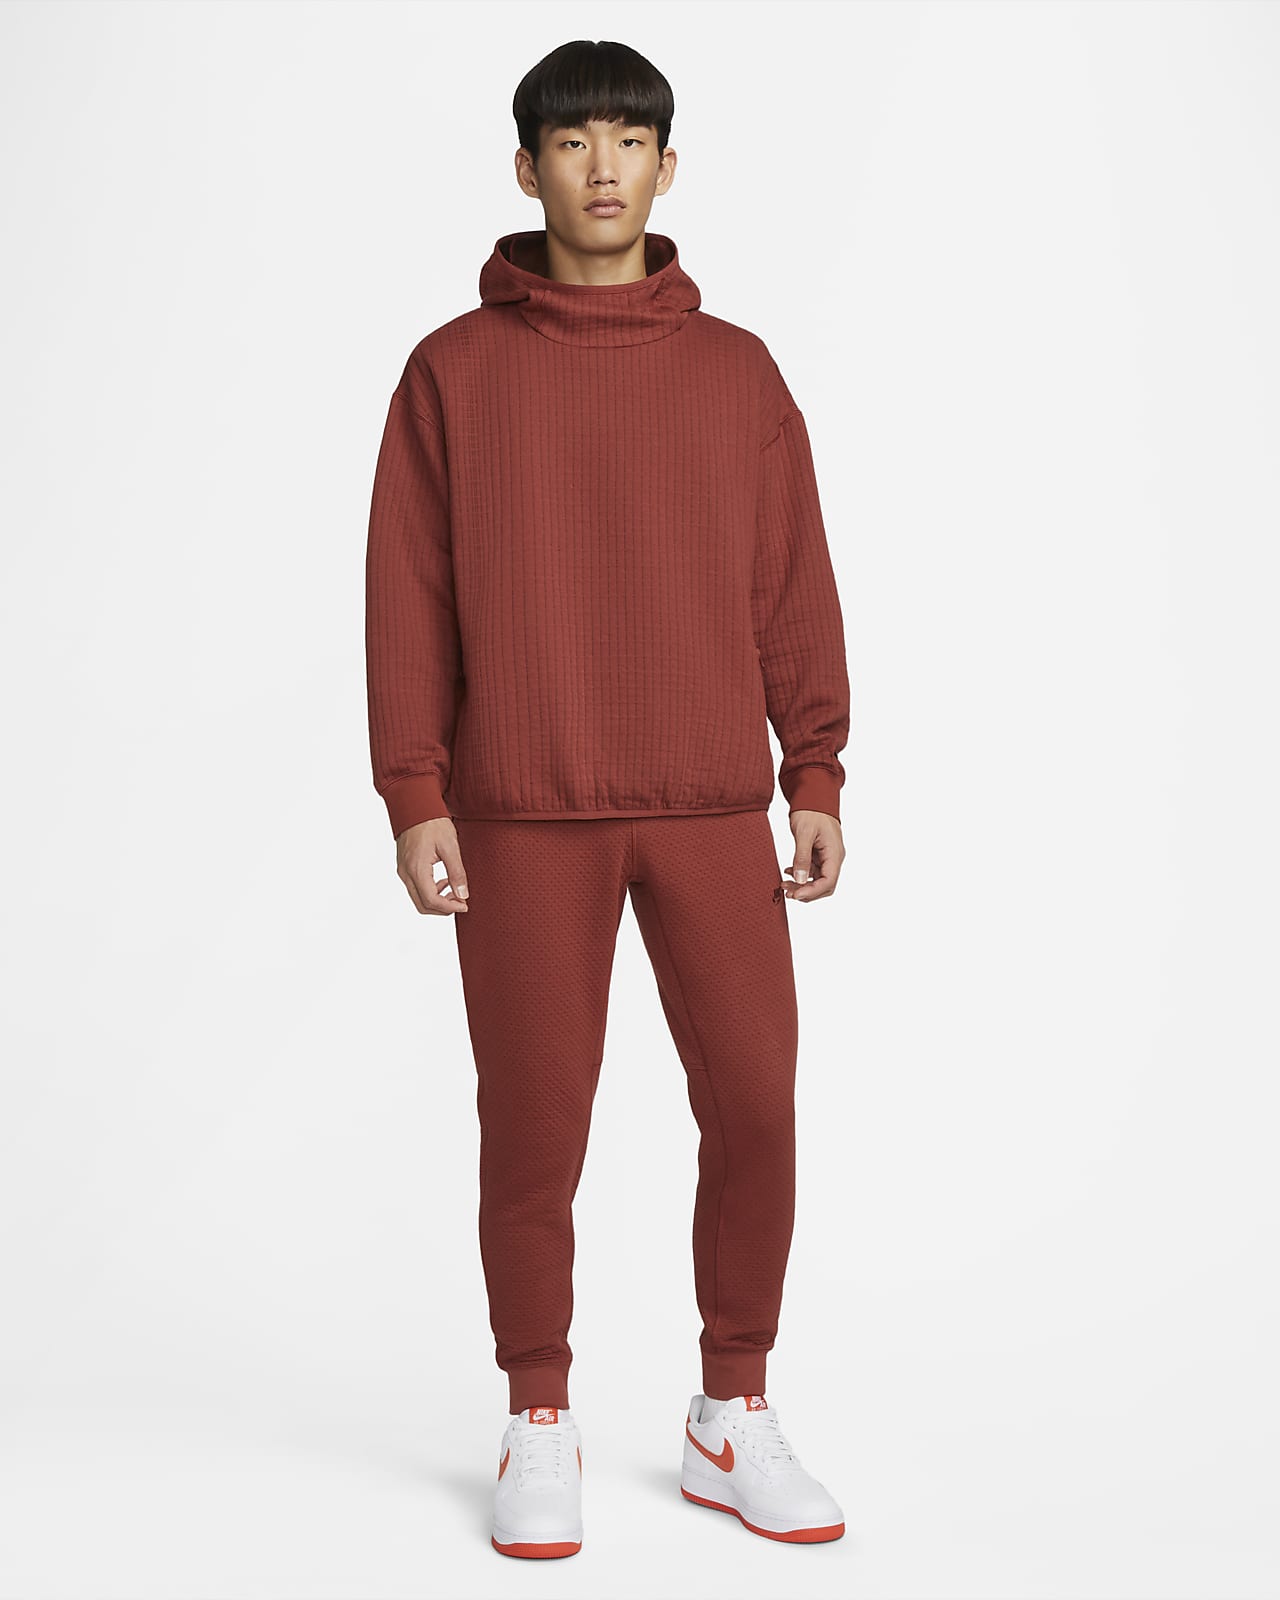 Nike Sportswear Therma-FIT Pack ADV Tech Pullover. Engineered